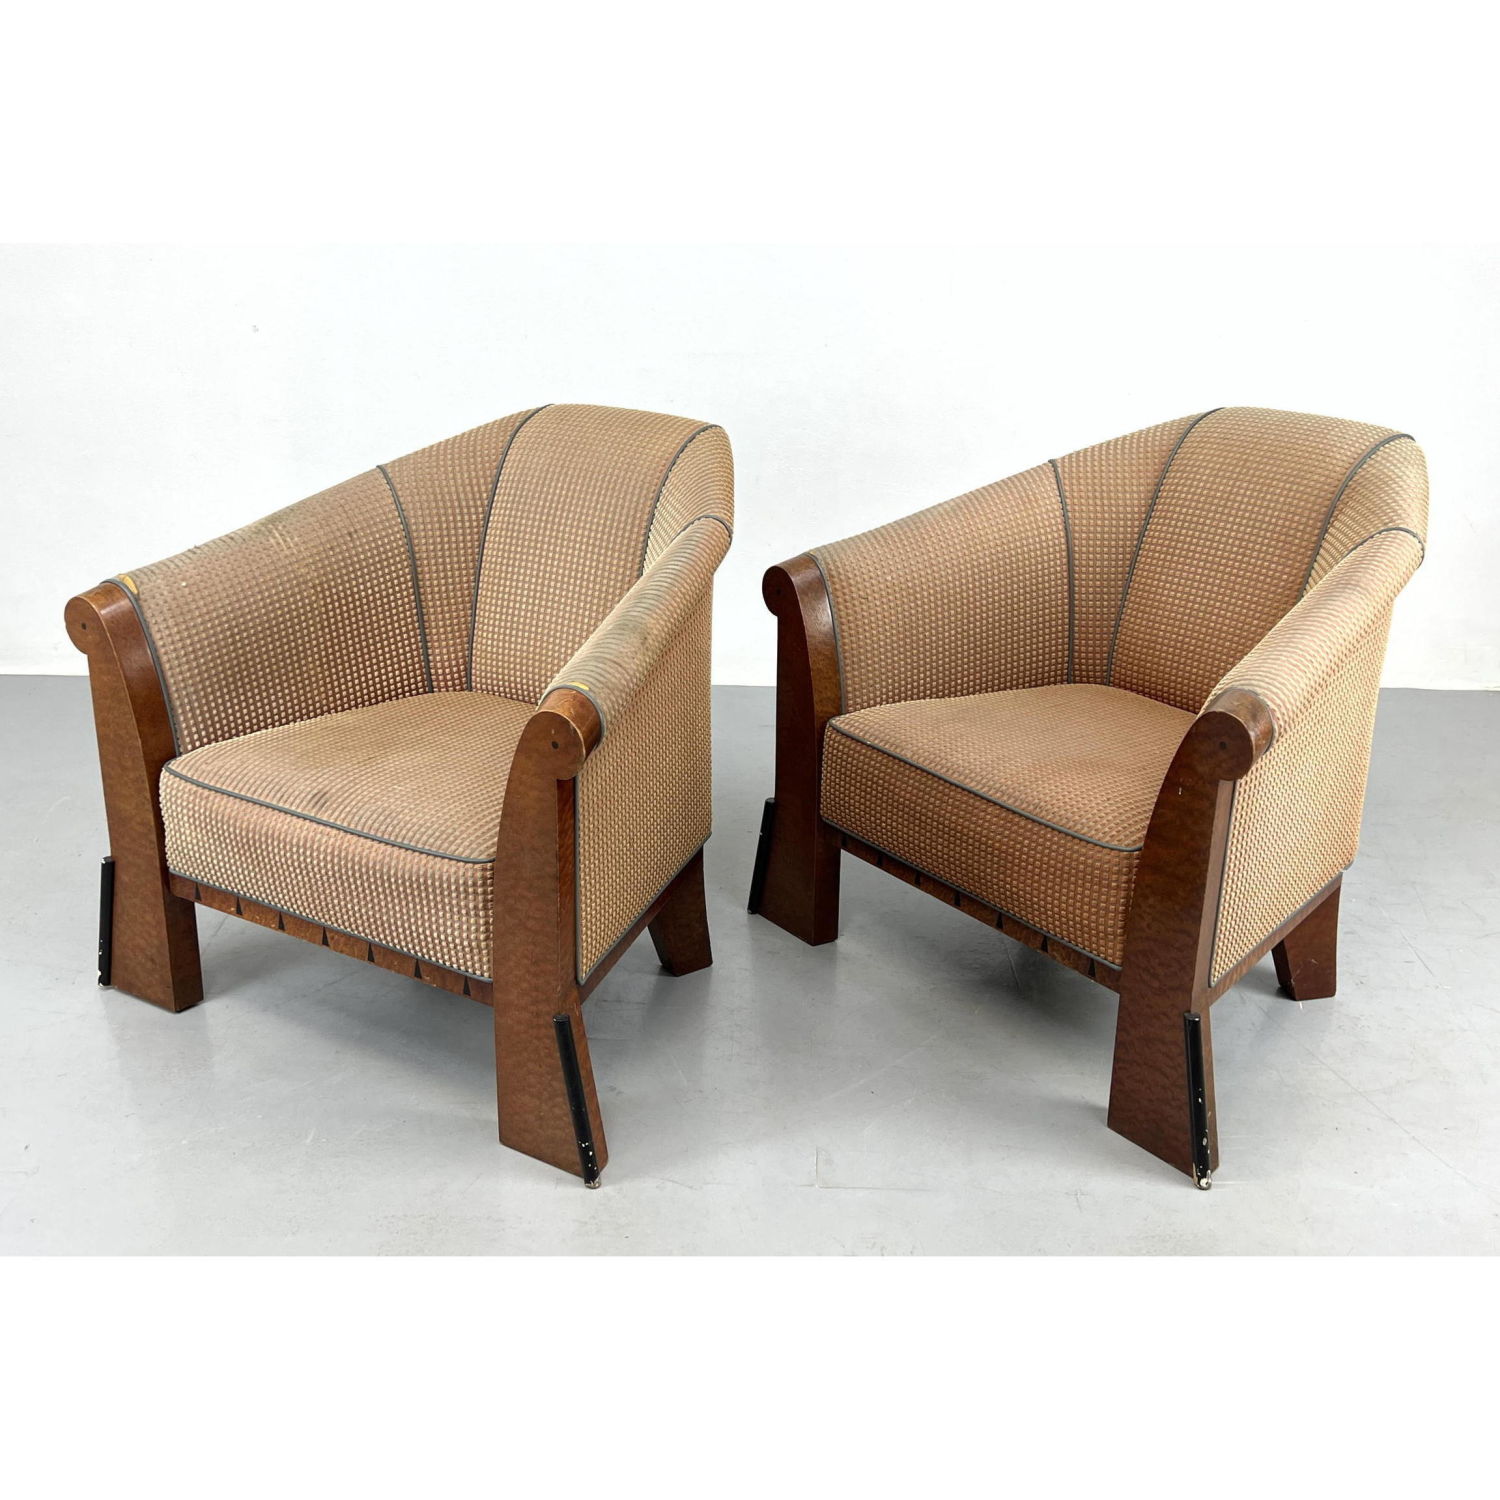 Pr chairs by Michael Graves for 2fcf90